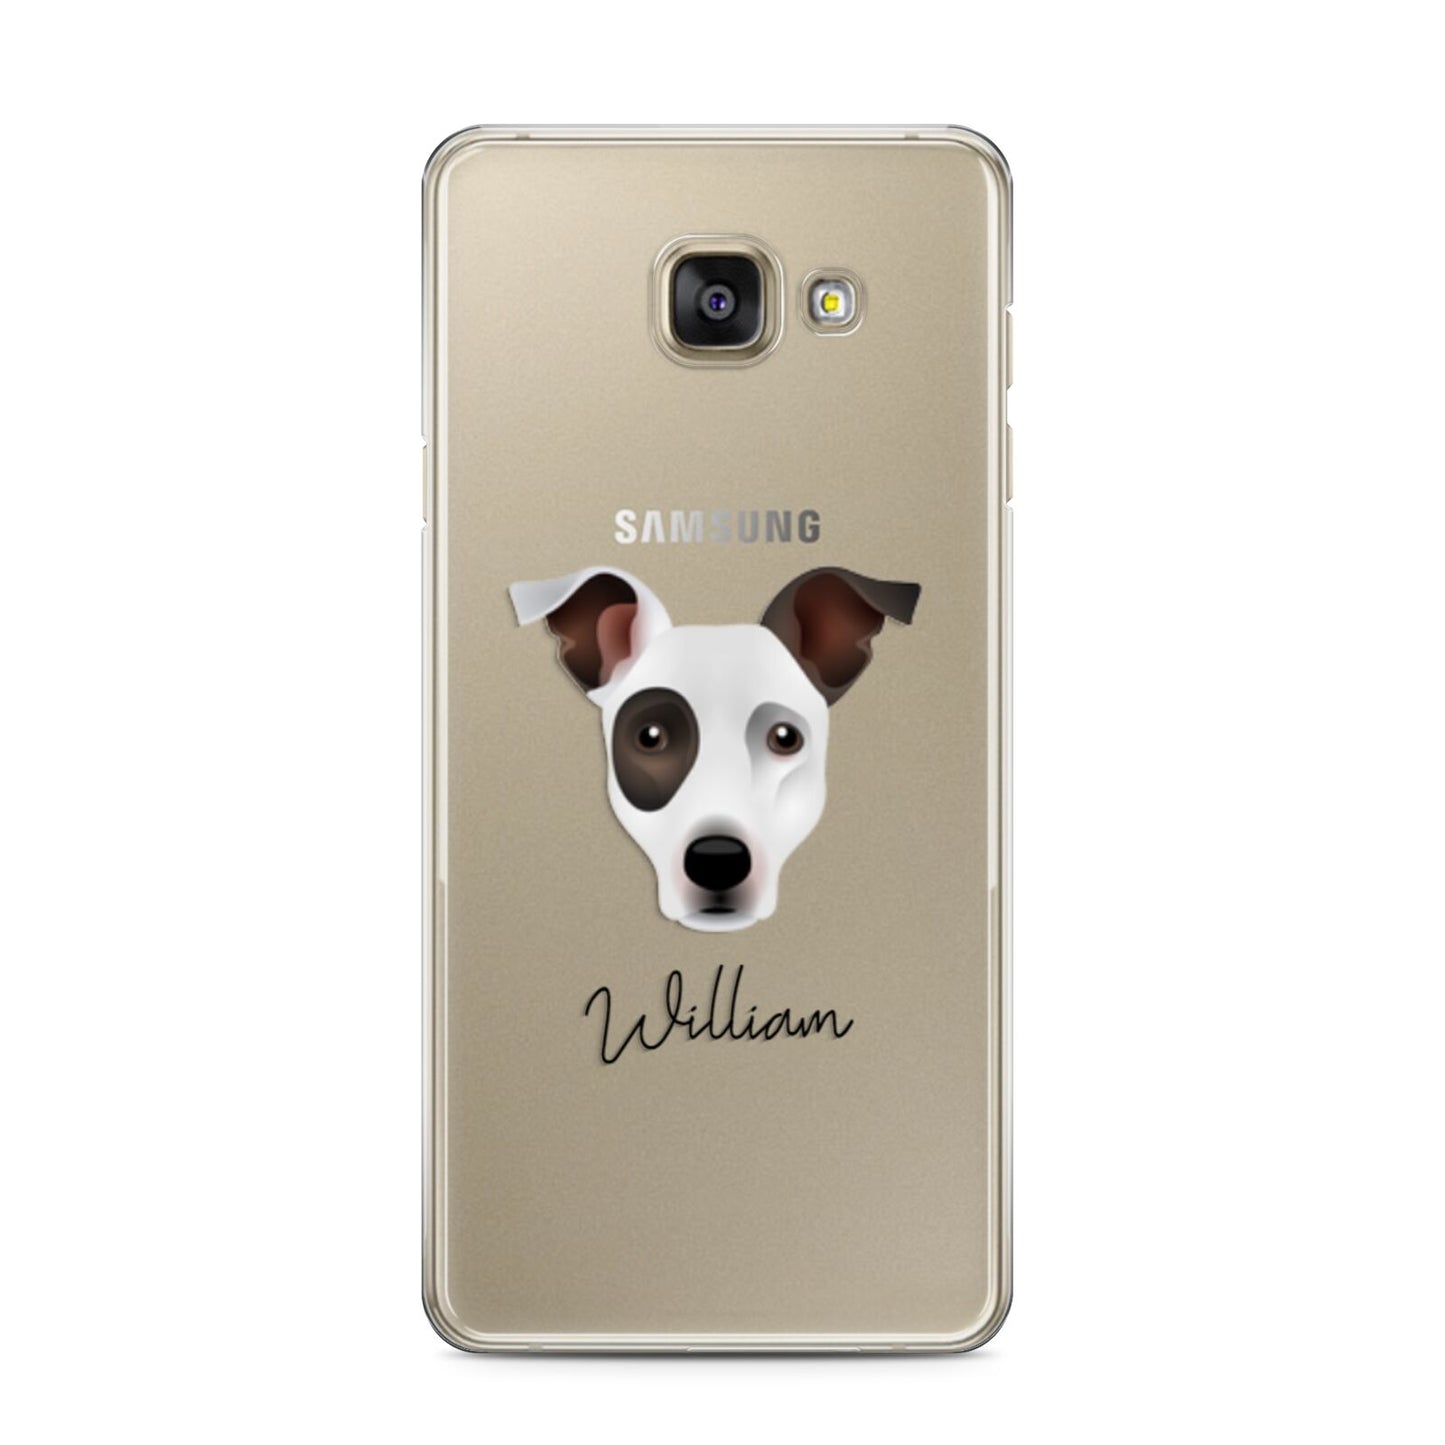 Staffy Jack Personalised Samsung Galaxy A3 2016 Case on gold phone